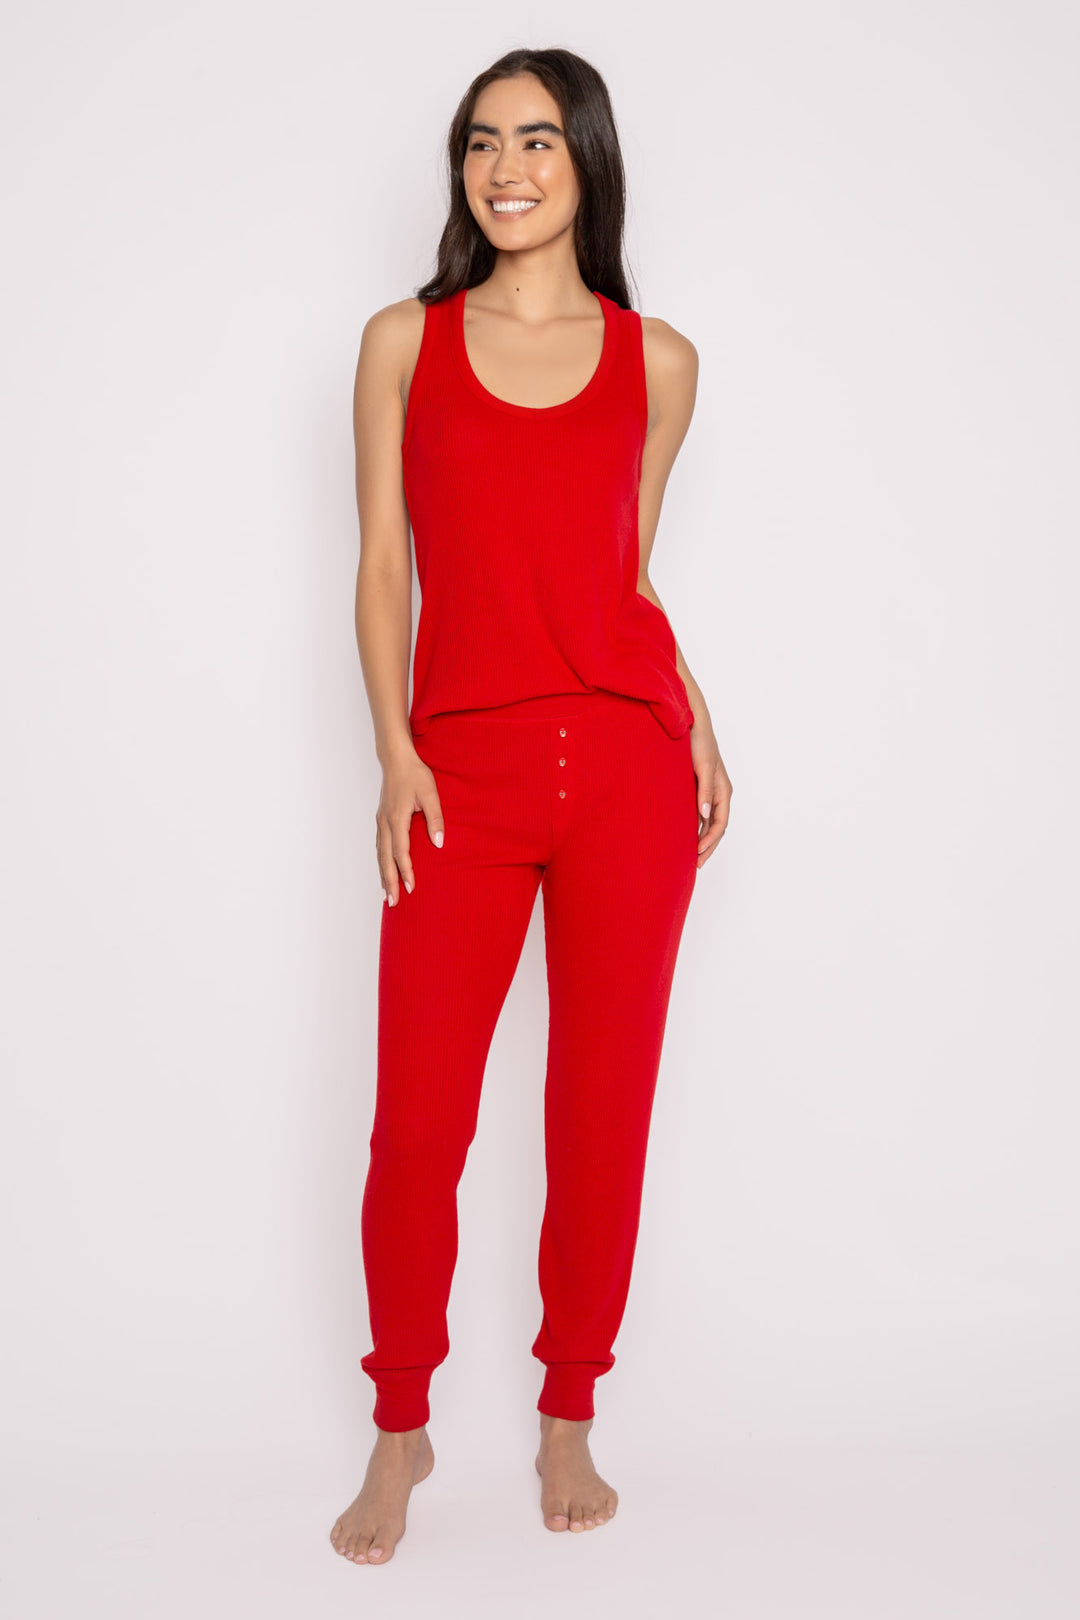 Ribbed red V-neck tank top & jammie pant in soft peachy 2x2 rib (7204728766564)